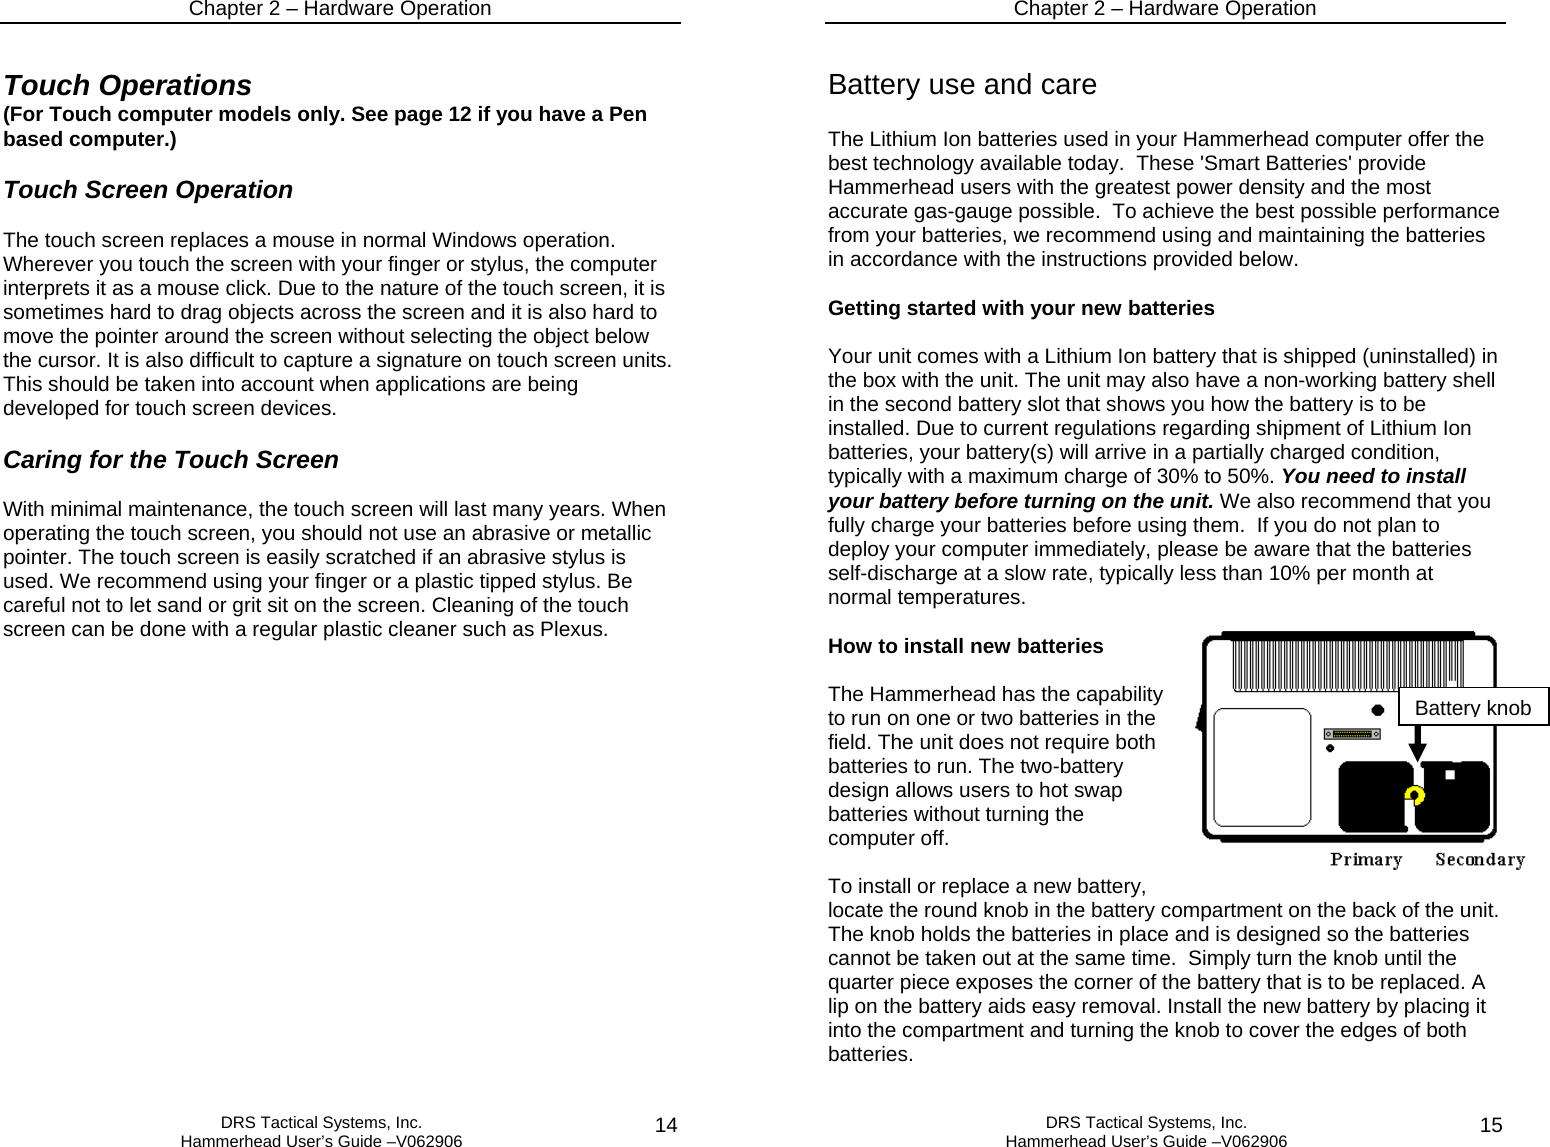 Chapter 2 – Hardware Operation   DRS Tactical Systems, Inc.  Hammerhead User’s Guide –V062906  14Touch Operations (For Touch computer models only. See page 12 if you have a Pen based computer.)  Touch Screen Operation  The touch screen replaces a mouse in normal Windows operation. Wherever you touch the screen with your finger or stylus, the computer interprets it as a mouse click. Due to the nature of the touch screen, it is sometimes hard to drag objects across the screen and it is also hard to move the pointer around the screen without selecting the object below the cursor. It is also difficult to capture a signature on touch screen units. This should be taken into account when applications are being developed for touch screen devices.   Caring for the Touch Screen  With minimal maintenance, the touch screen will last many years. When operating the touch screen, you should not use an abrasive or metallic pointer. The touch screen is easily scratched if an abrasive stylus is used. We recommend using your finger or a plastic tipped stylus. Be careful not to let sand or grit sit on the screen. Cleaning of the touch screen can be done with a regular plastic cleaner such as Plexus.  Chapter 2 – Hardware Operation   DRS Tactical Systems, Inc.  Hammerhead User’s Guide –V062906  15 Battery use and care  The Lithium Ion batteries used in your Hammerhead computer offer the best technology available today.  These &apos;Smart Batteries&apos; provide Hammerhead users with the greatest power density and the most accurate gas-gauge possible.  To achieve the best possible performance from your batteries, we recommend using and maintaining the batteries in accordance with the instructions provided below.  Getting started with your new batteries  Your unit comes with a Lithium Ion battery that is shipped (uninstalled) in the box with the unit. The unit may also have a non-working battery shell in the second battery slot that shows you how the battery is to be installed. Due to current regulations regarding shipment of Lithium Ion batteries, your battery(s) will arrive in a partially charged condition, typically with a maximum charge of 30% to 50%. You need to install your battery before turning on the unit. We also recommend that you fully charge your batteries before using them.  If you do not plan to deploy your computer immediately, please be aware that the batteries self-discharge at a slow rate, typically less than 10% per month at normal temperatures.    How to install new batteries  The Hammerhead has the capability to run on one or two batteries in the field. The unit does not require both batteries to run. The two-battery design allows users to hot swap batteries without turning the computer off.   To install or replace a new battery, locate the round knob in the battery compartment on the back of the unit.  The knob holds the batteries in place and is designed so the batteries cannot be taken out at the same time.  Simply turn the knob until the quarter piece exposes the corner of the battery that is to be replaced. A lip on the battery aids easy removal. Install the new battery by placing it into the compartment and turning the knob to cover the edges of both batteries.  Battery knob 